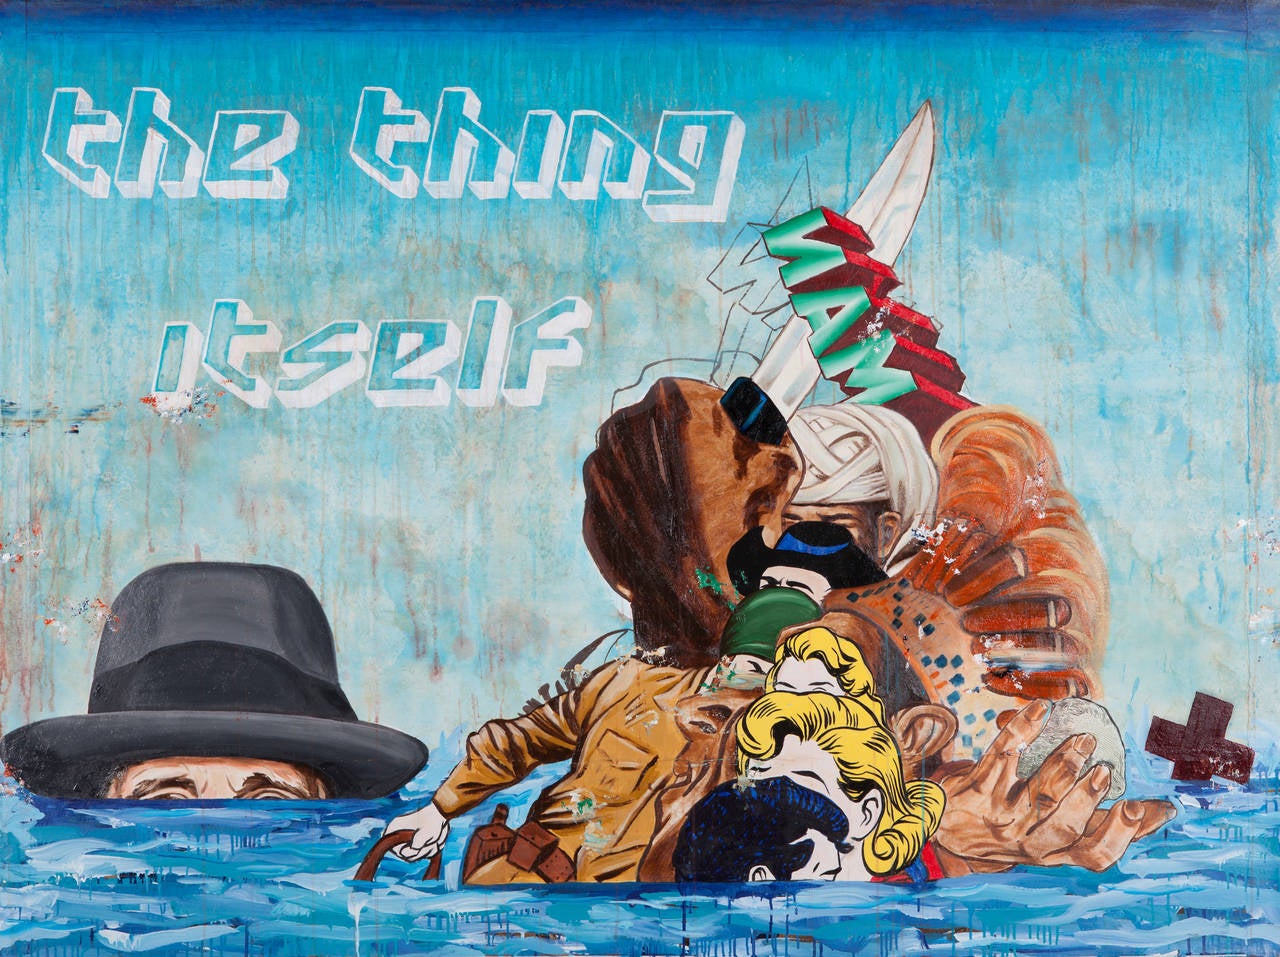 The Thing Itself (with Joseph beuys) - Painting by Enrique Chagoya